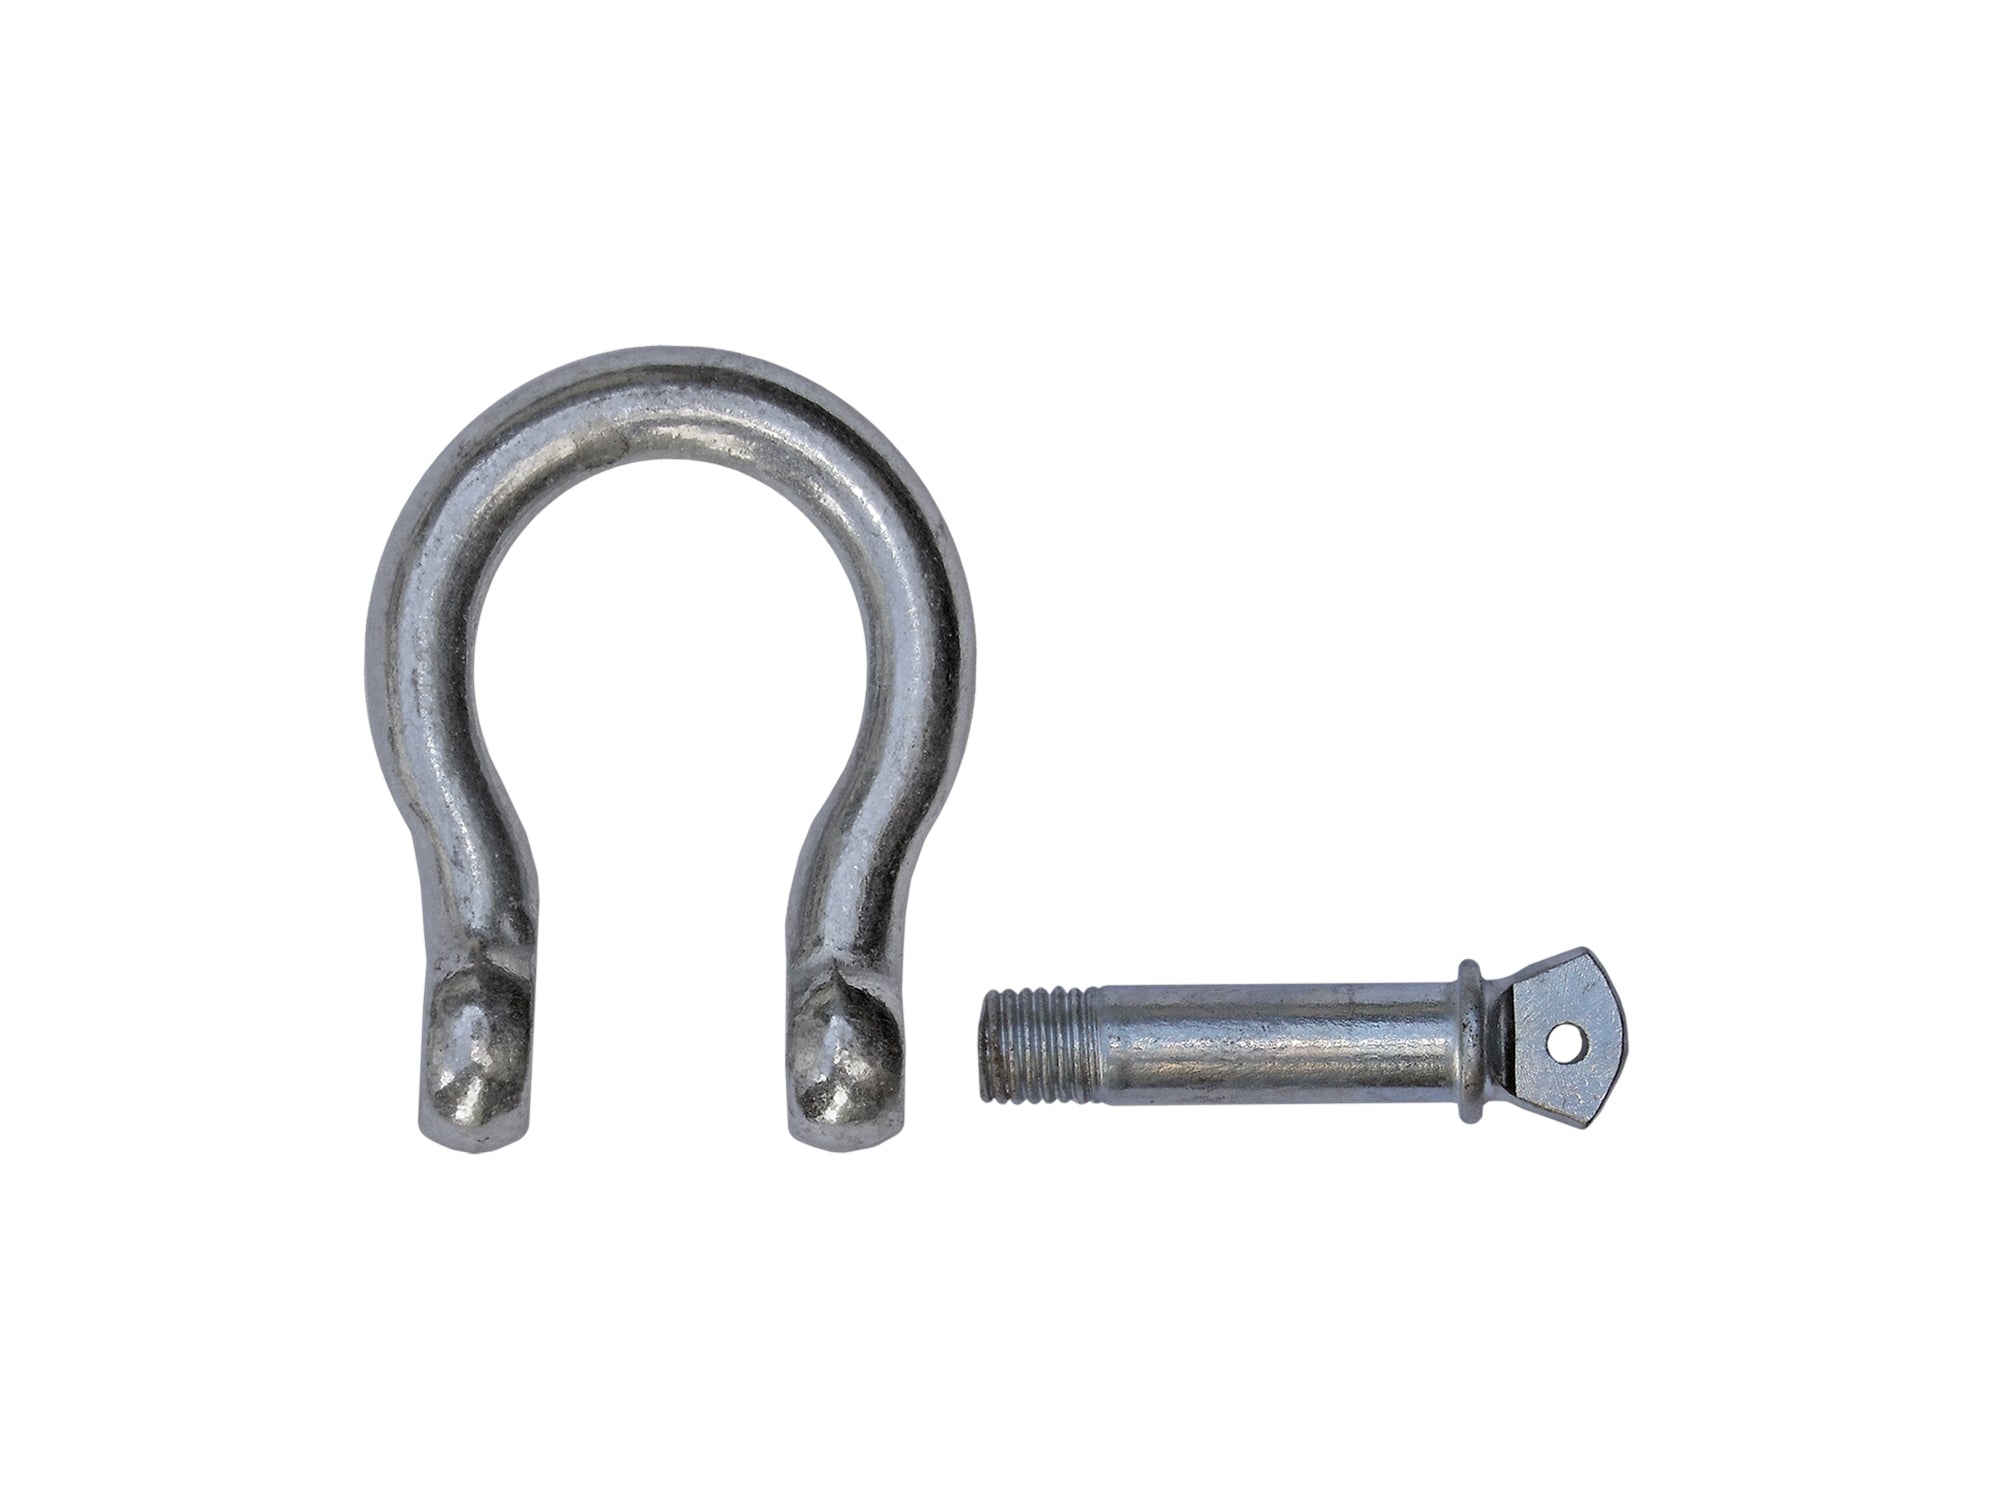 Pin Bow Shackles, 1/4" Galvanized - FO432